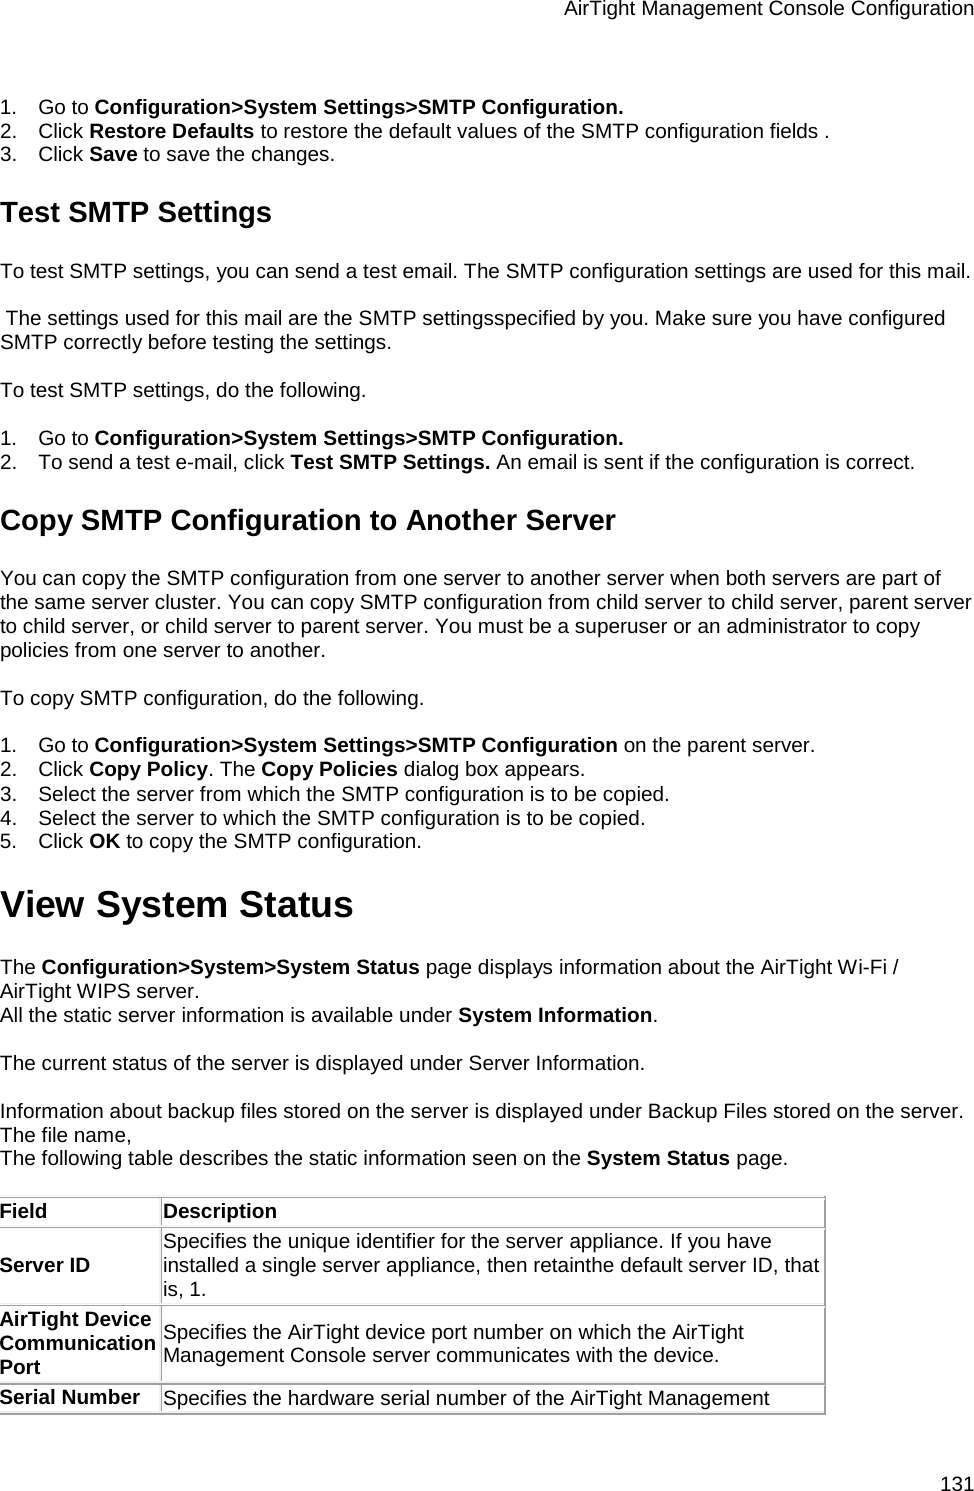 AirTight Management Console Configuration 131   1.      Go to Configuration&gt;System Settings&gt;SMTP Configuration. 2.      Click Restore Defaults to restore the default values of the SMTP configuration fields . 3.      Click Save to save the changes. Test SMTP Settings To test SMTP settings, you can send a test email. The SMTP configuration settings are used for this mail.    The settings used for this mail are the SMTP settingsspecified by you. Make sure you have configured SMTP correctly before testing the settings.   To test SMTP settings, do the following.   1.      Go to Configuration&gt;System Settings&gt;SMTP Configuration. 2.      To send a test e-mail, click Test SMTP Settings. An email is sent if the configuration is correct. Copy SMTP Configuration to Another Server You can copy the SMTP configuration from one server to another server when both servers are part of the same server cluster. You can copy SMTP configuration from child server to child server, parent server to child server, or child server to parent server. You must be a superuser or an administrator to copy policies from one server to another.   To copy SMTP configuration, do the following.   1.      Go to Configuration&gt;System Settings&gt;SMTP Configuration on the parent server. 2.      Click Copy Policy. The Copy Policies dialog box appears. 3.      Select the server from which the SMTP configuration is to be copied. 4.      Select the server to which the SMTP configuration is to be copied. 5.      Click OK to copy the SMTP configuration. View System Status The Configuration&gt;System&gt;System Status page displays information about the AirTight Wi-Fi / AirTight WIPS server.  All the static server information is available under System Information.   The current status of the server is displayed under Server Information.   Information about backup files stored on the server is displayed under Backup Files stored on the server. The file name,  The following table describes the static information seen on the System Status page.   Field Description Server ID Specifies the unique identifier for the server appliance. If you have installed a single server appliance, then retainthe default server ID, that is, 1. AirTight Device Communication Port Specifies the AirTight device port number on which the AirTight Management Console server communicates with the device. Serial Number Specifies the hardware serial number of the AirTight Management 